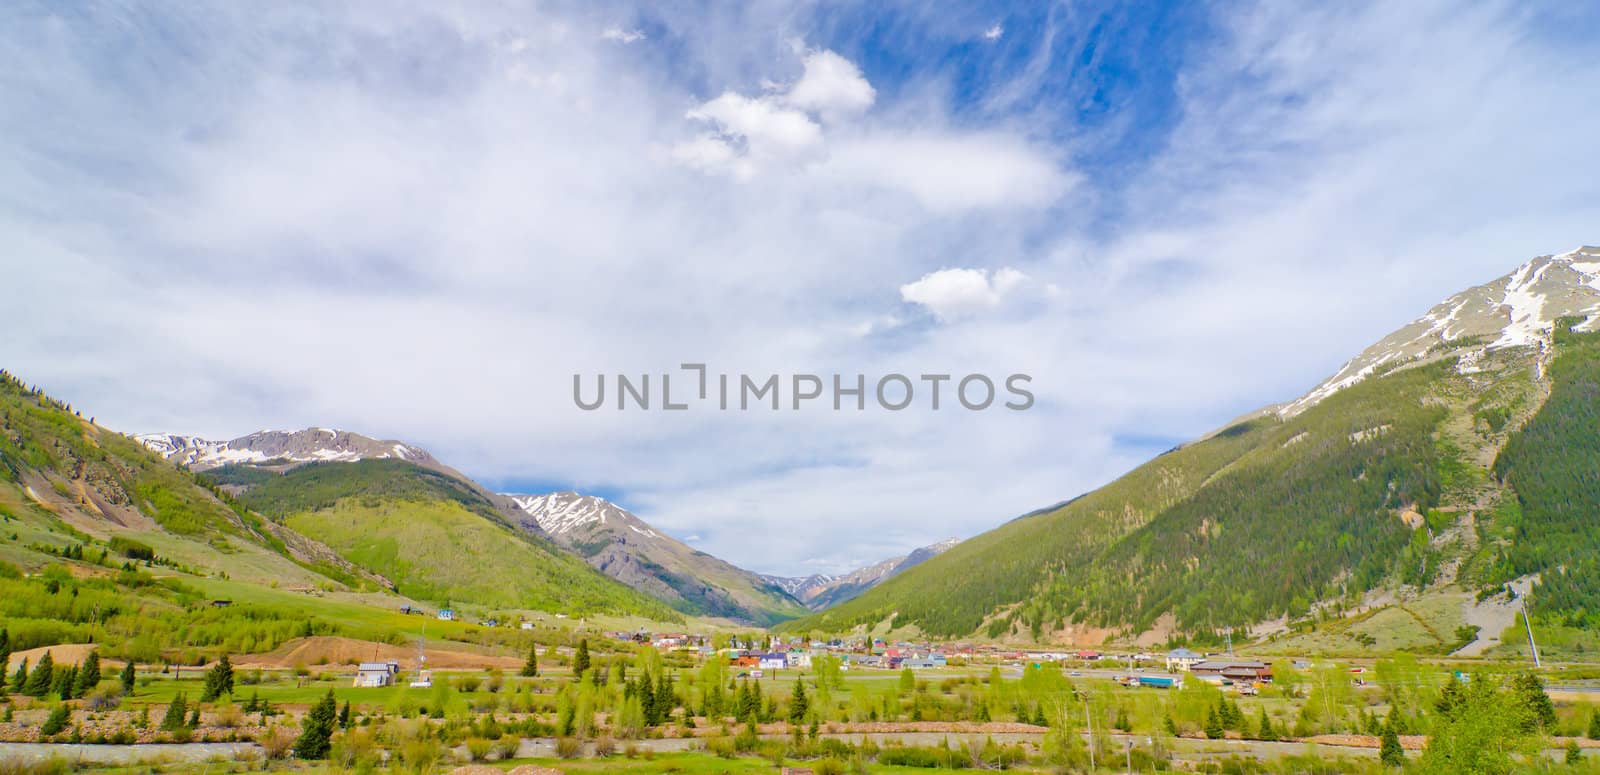 The City of Silverton nestled in the San Juan Mountains in Colorado by robert.bohrer25@gmail.com